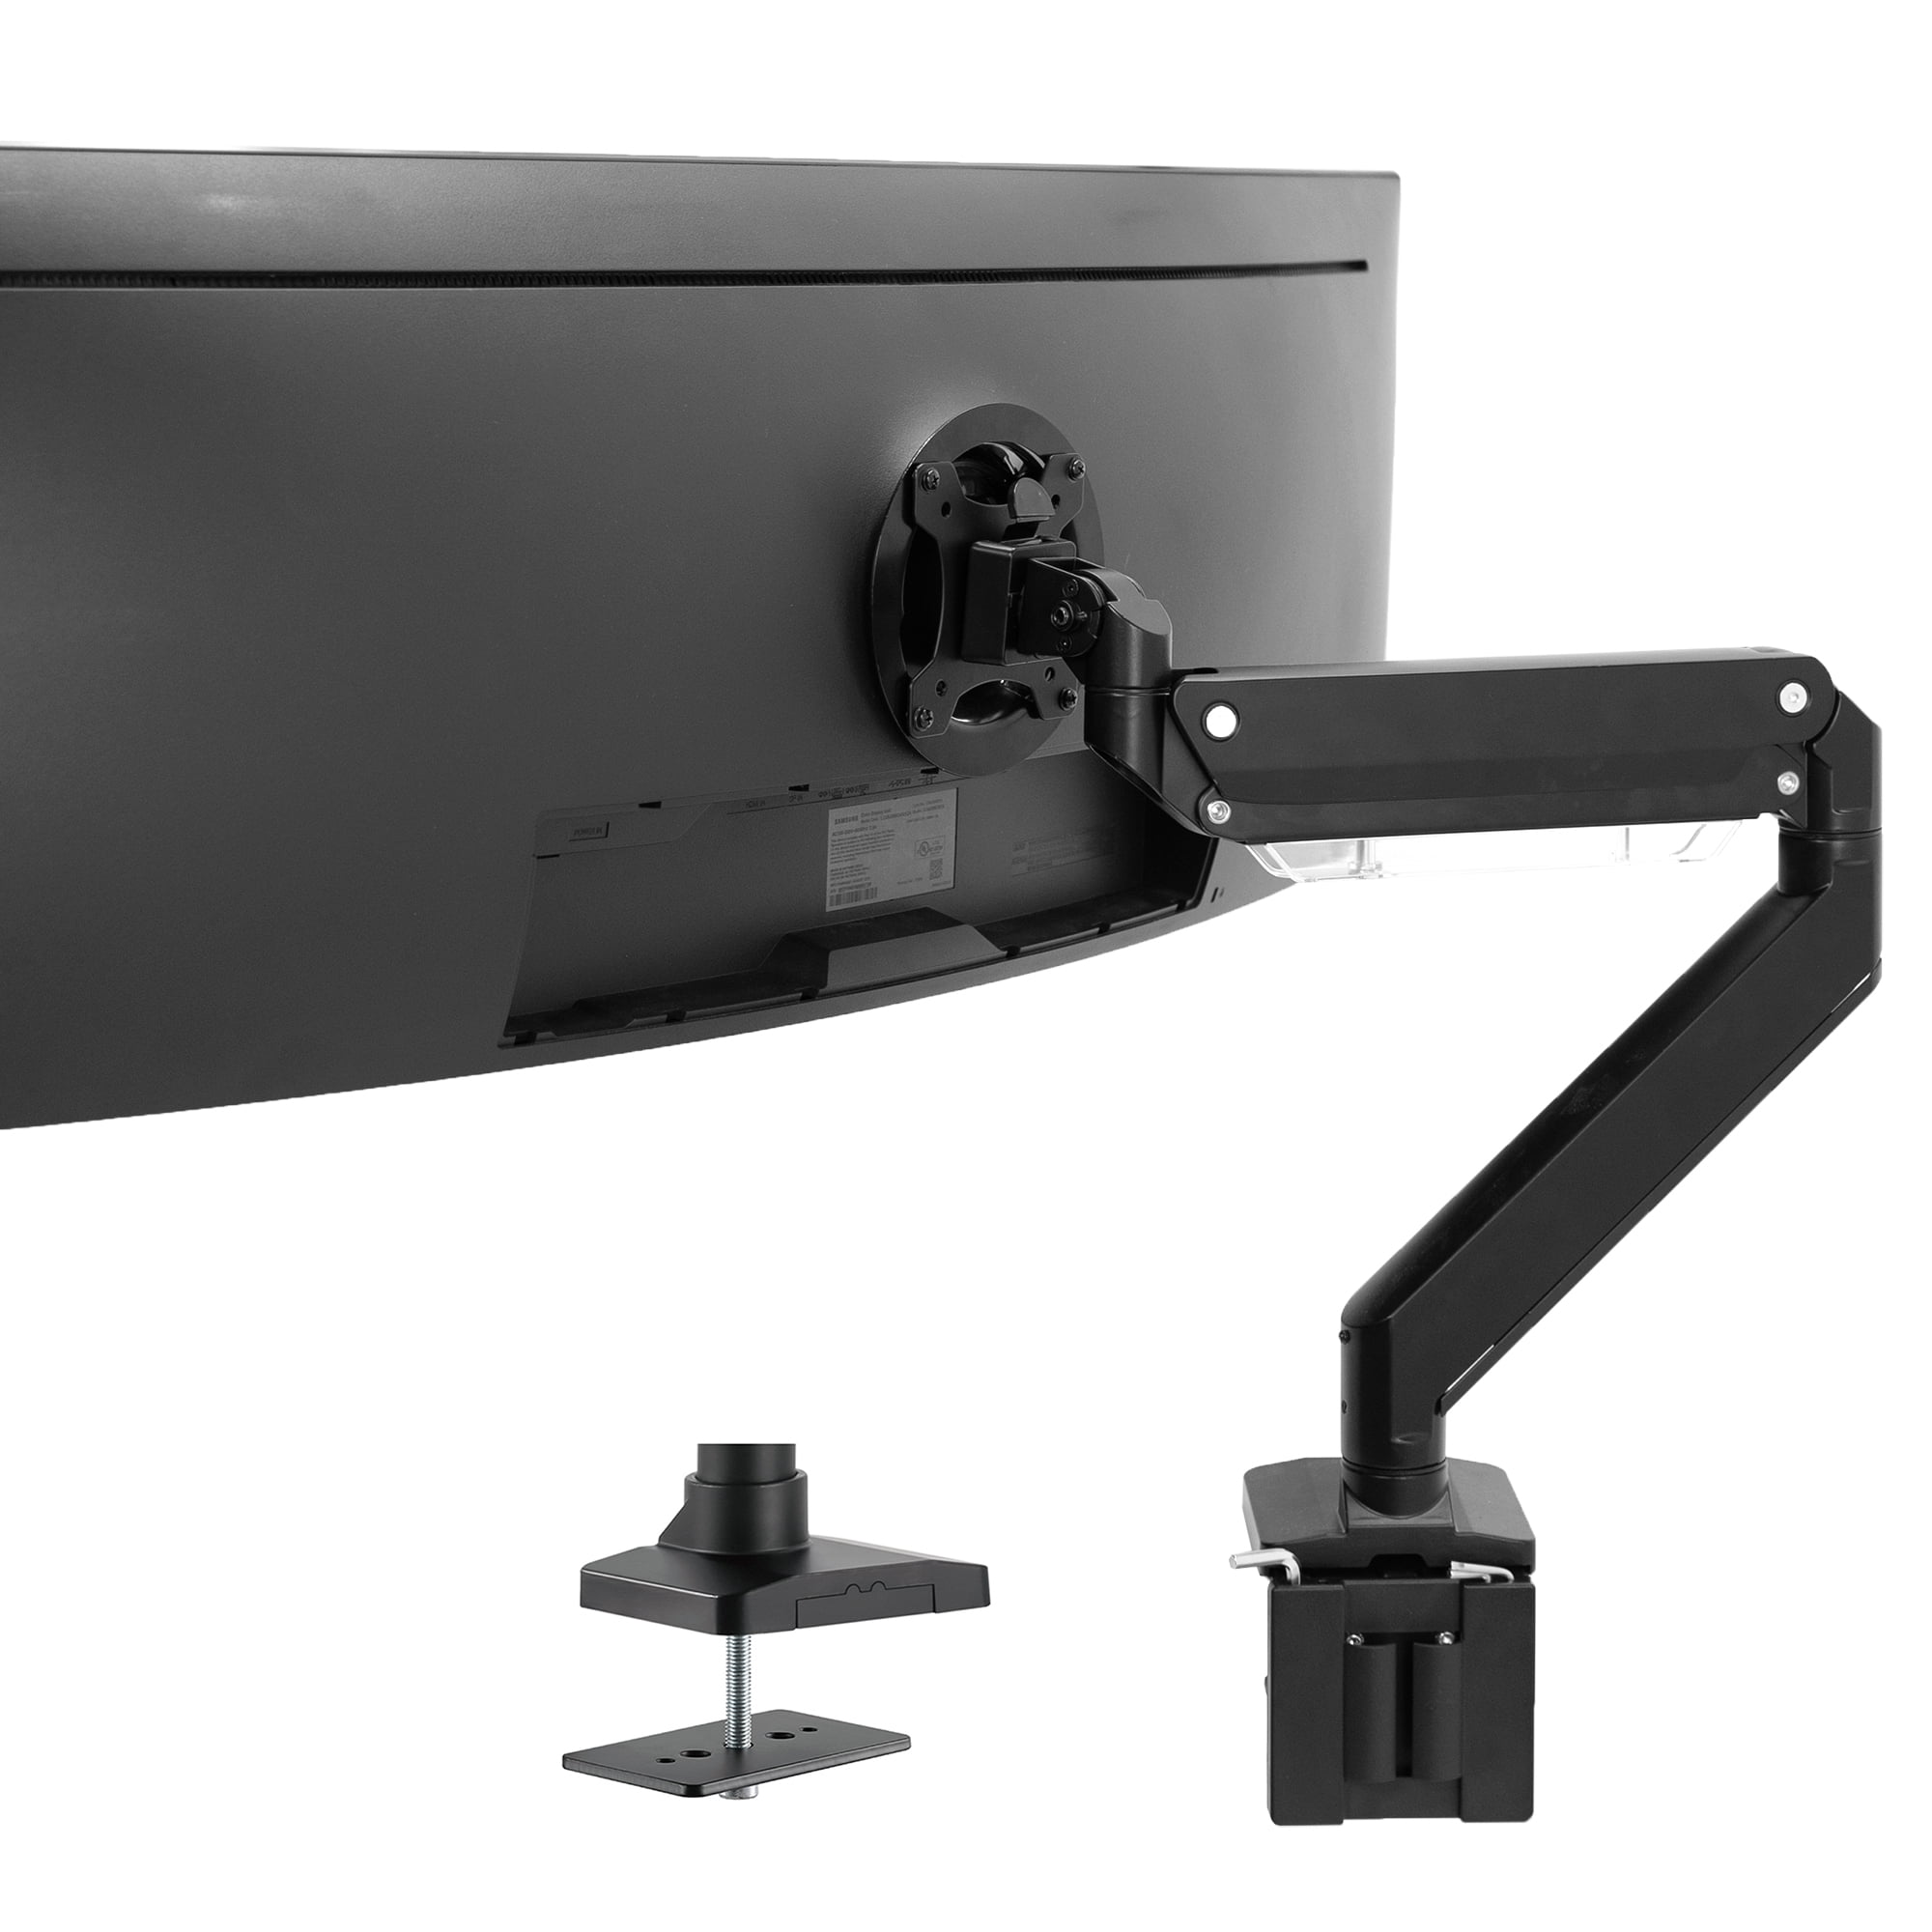 Dual Aluminum Heavy Duty Mount with USB and Audio Ports - 35